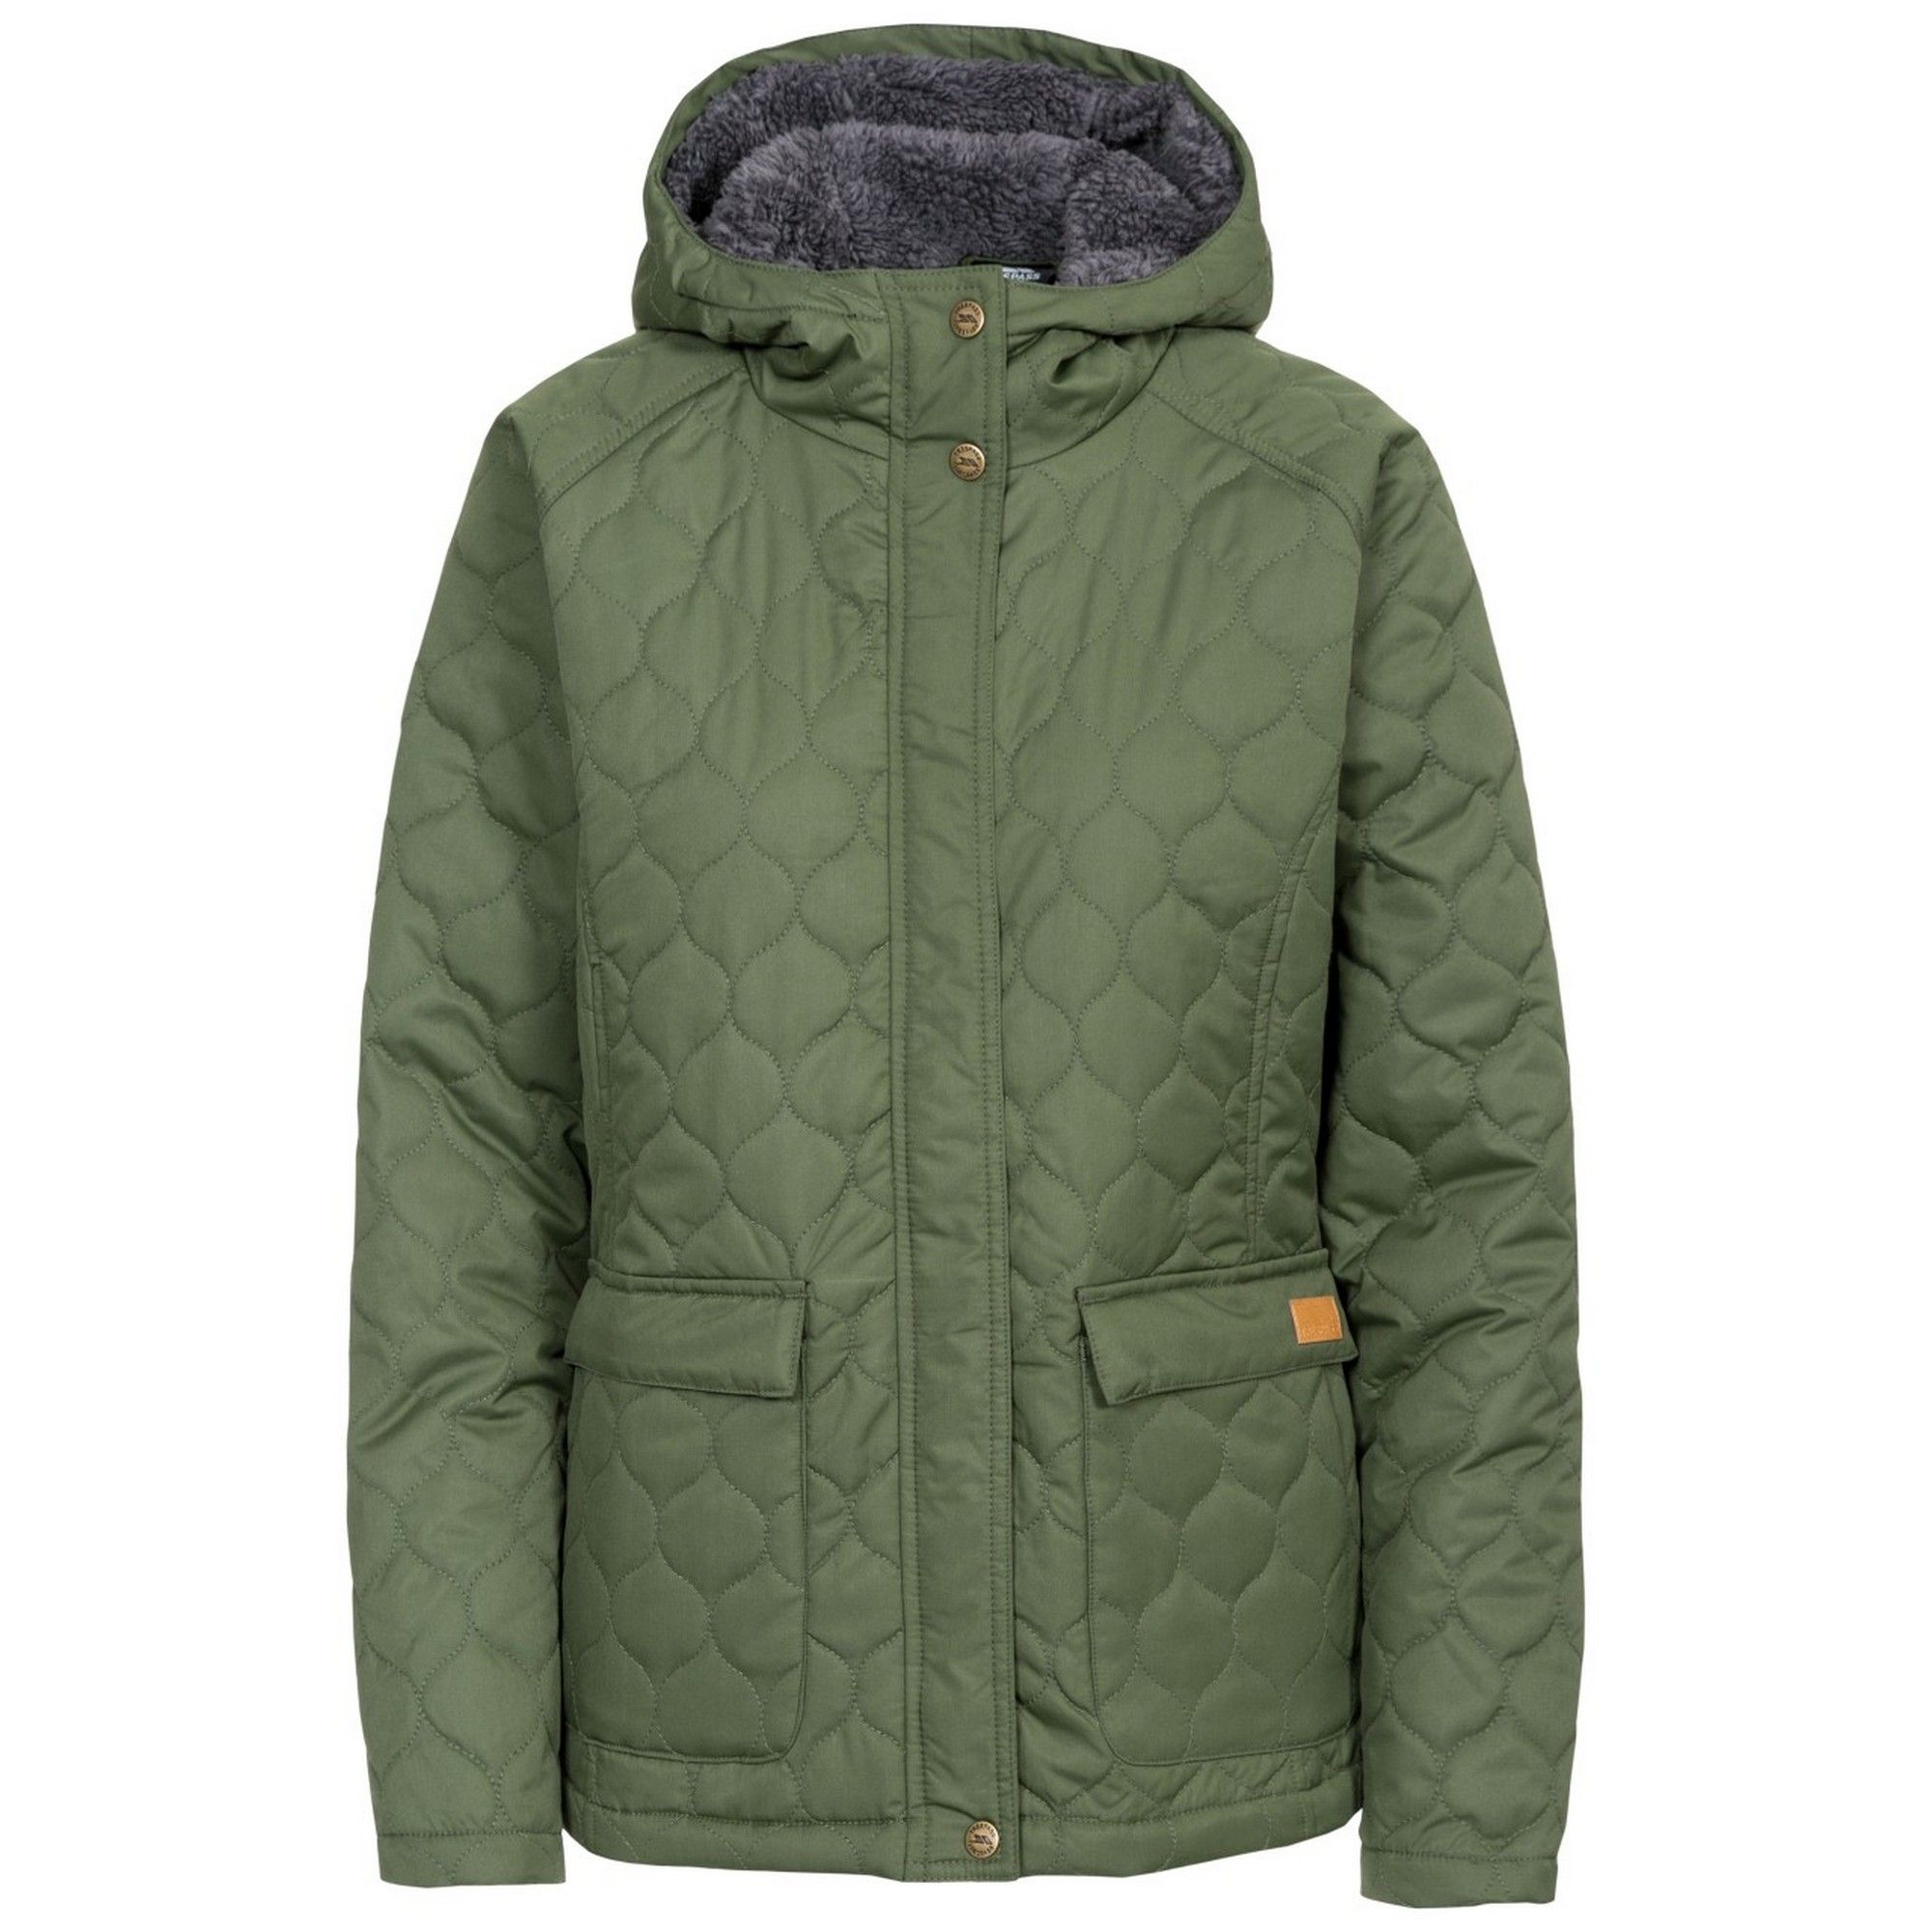 Lightly padded. Onion shaped quilting. Furry fleece hood lining. Grown on hood. 2 patch pockets with flaps, 2 side entry pockets. Flat cuff. Back hem vent. Shell: 100% Polyester, Lining: 100% Polyester, Filling: 100% Polyester. Trespass Womens Chest Sizing (approx): XS/8 - 32in/81cm, S/10 - 34in/86cm, M/12 - 36in/91.4cm, L/14 - 38in/96.5cm, XL/16 - 40in/101.5cm, XXL/18 - 42in/106.5cm.